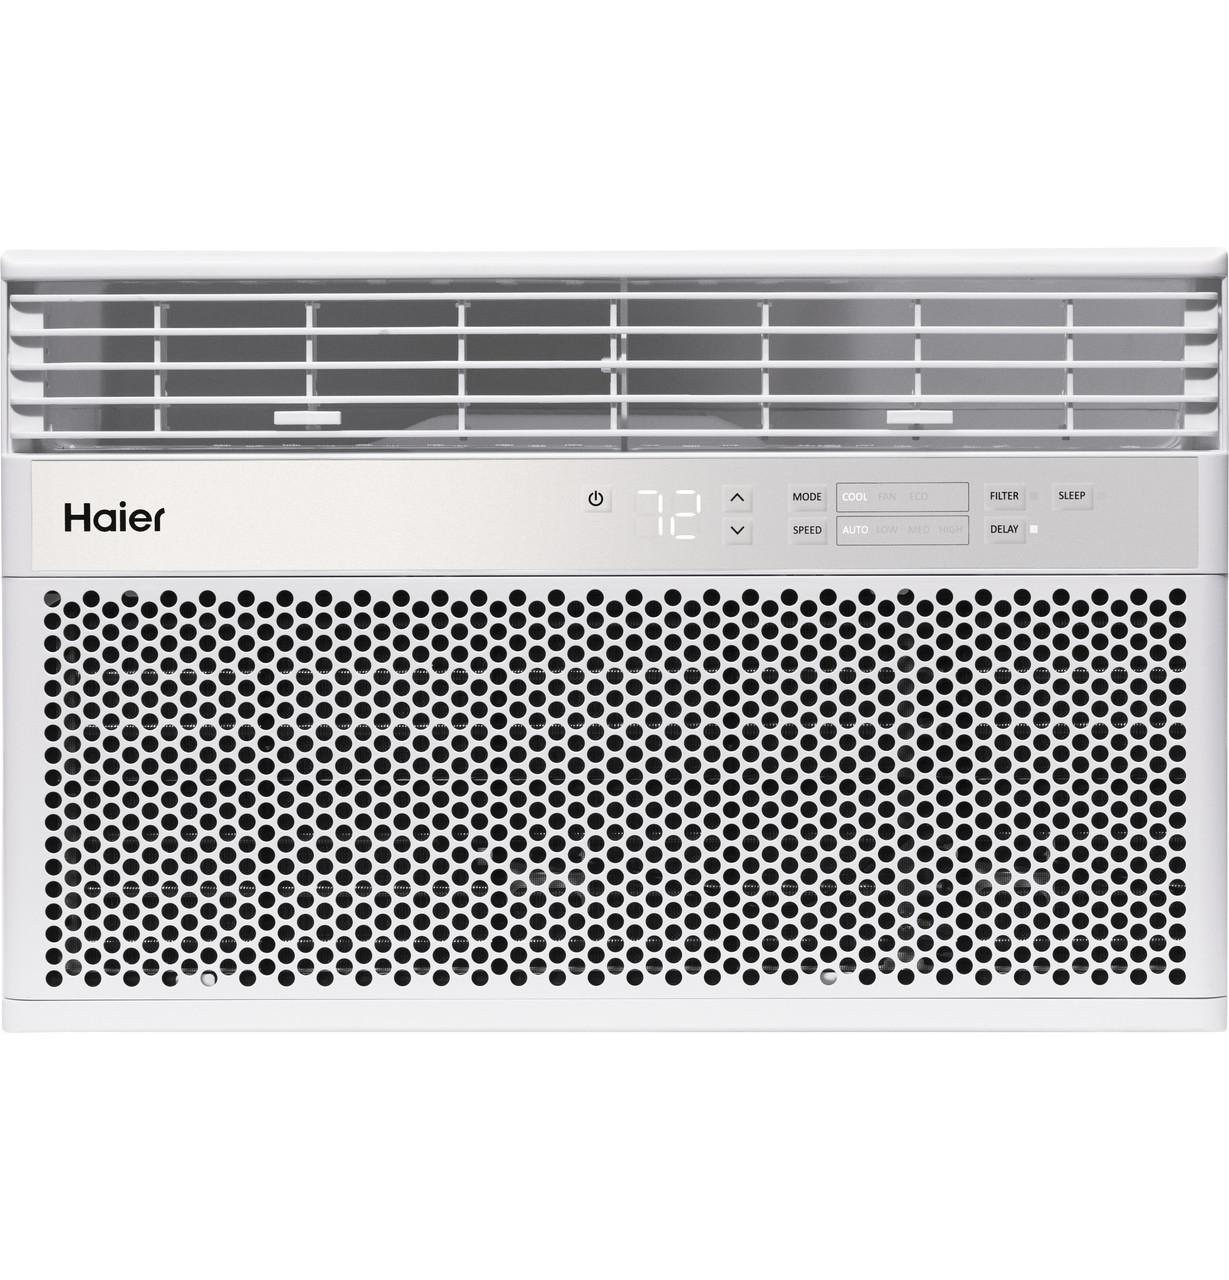 Haier ENERGY STAR® 115 Volt Electronic Room Air Conditioner